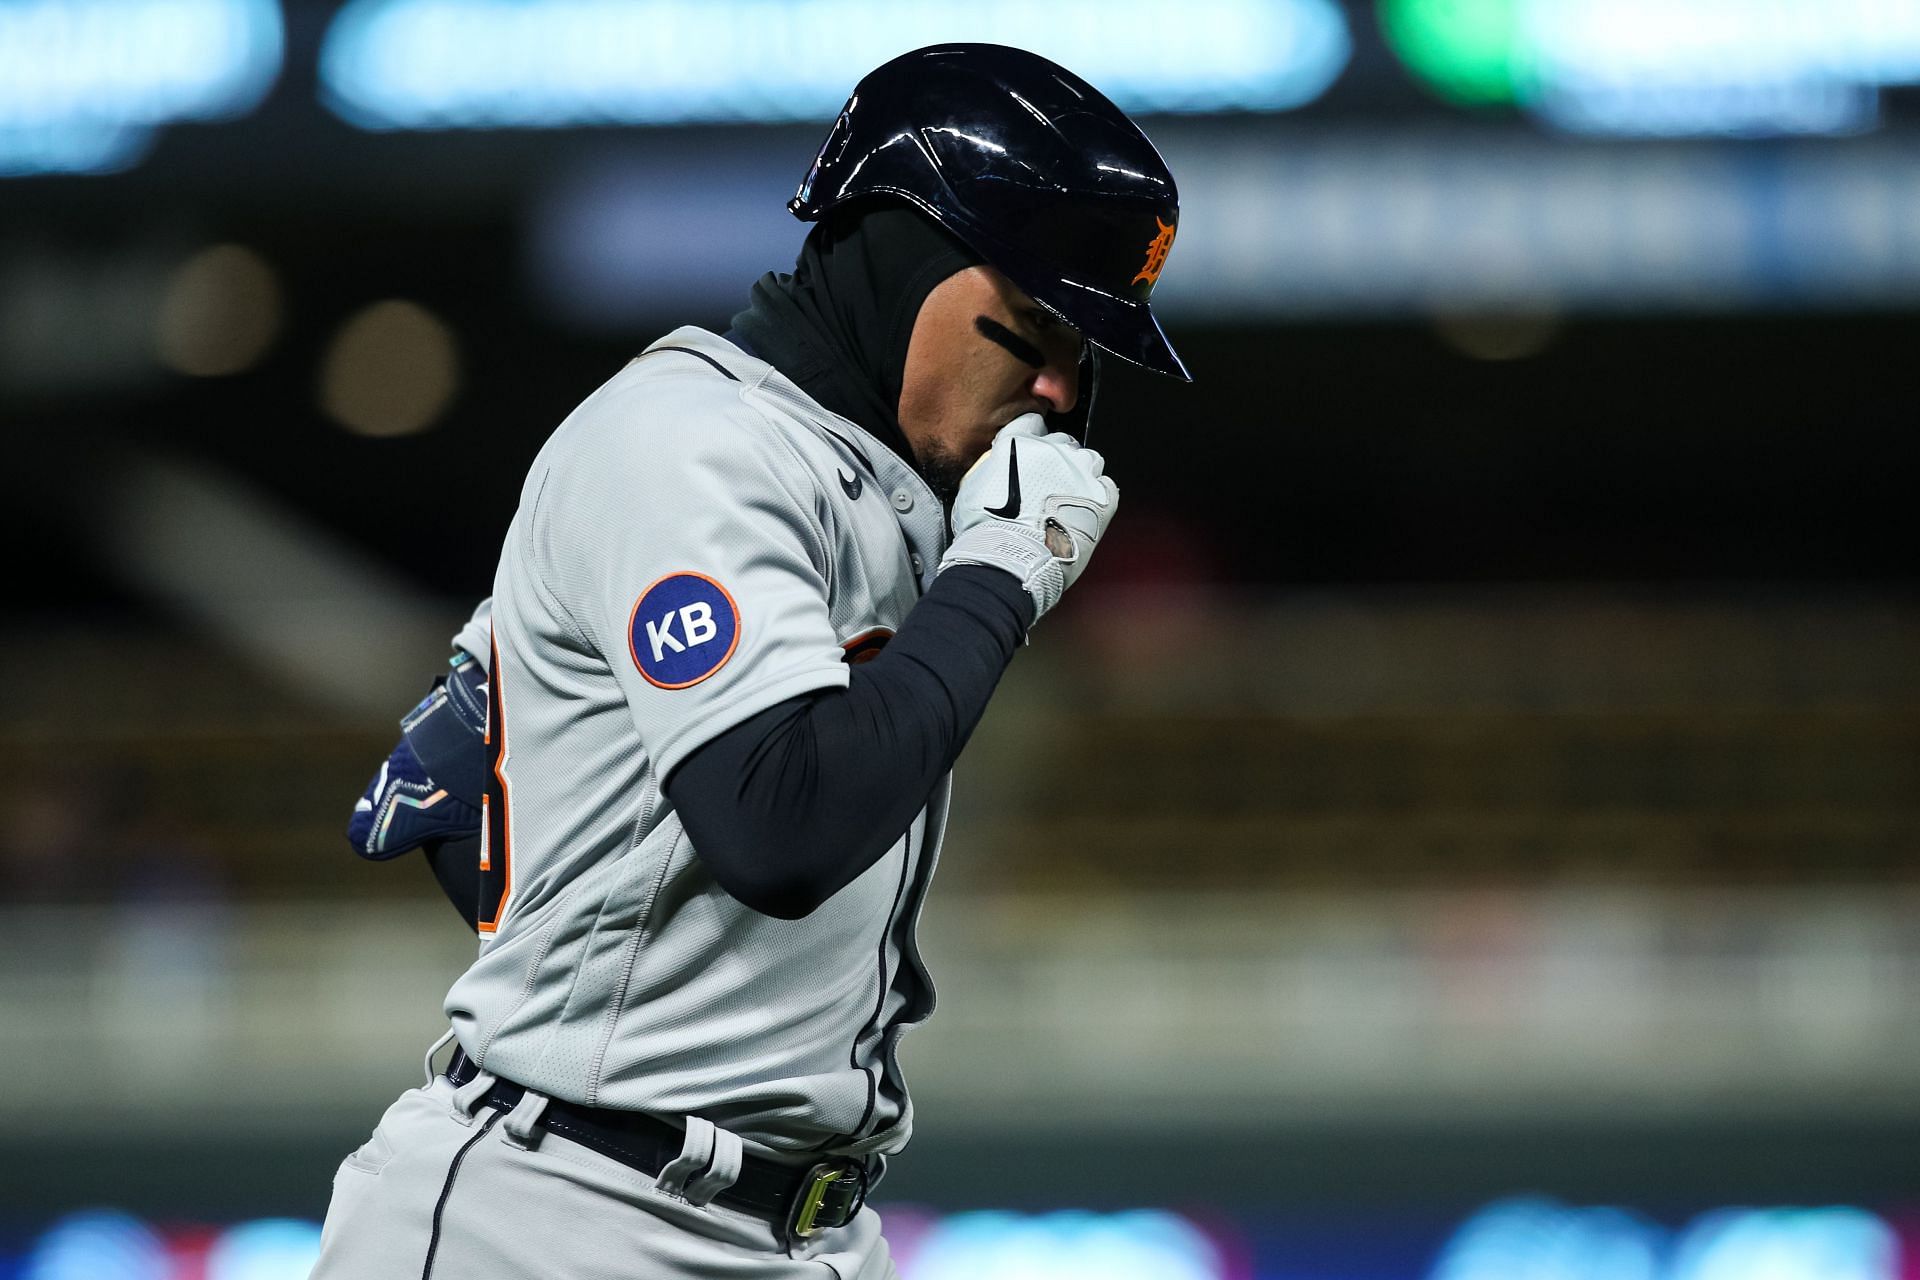 Detroit Tigers SS Javier Baez has showed some signs of heating up. He hit a three-run HR against the Twins on Tuesday